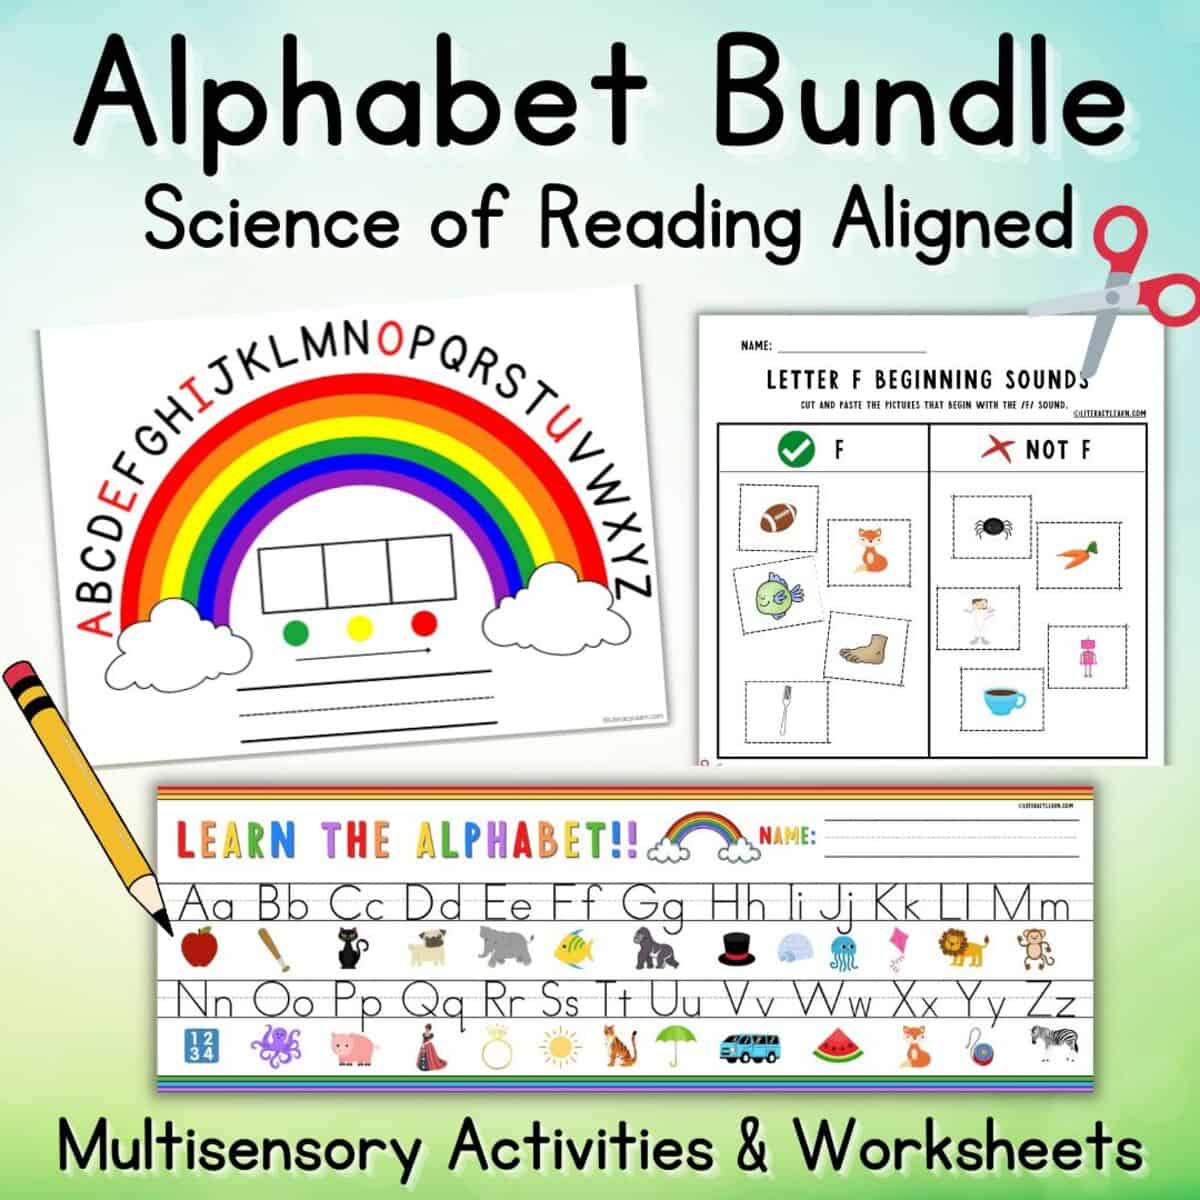 Graphic with 'alphabet bundle' title with alpahbet arc, beginning sound worksheets, and letter placemat.